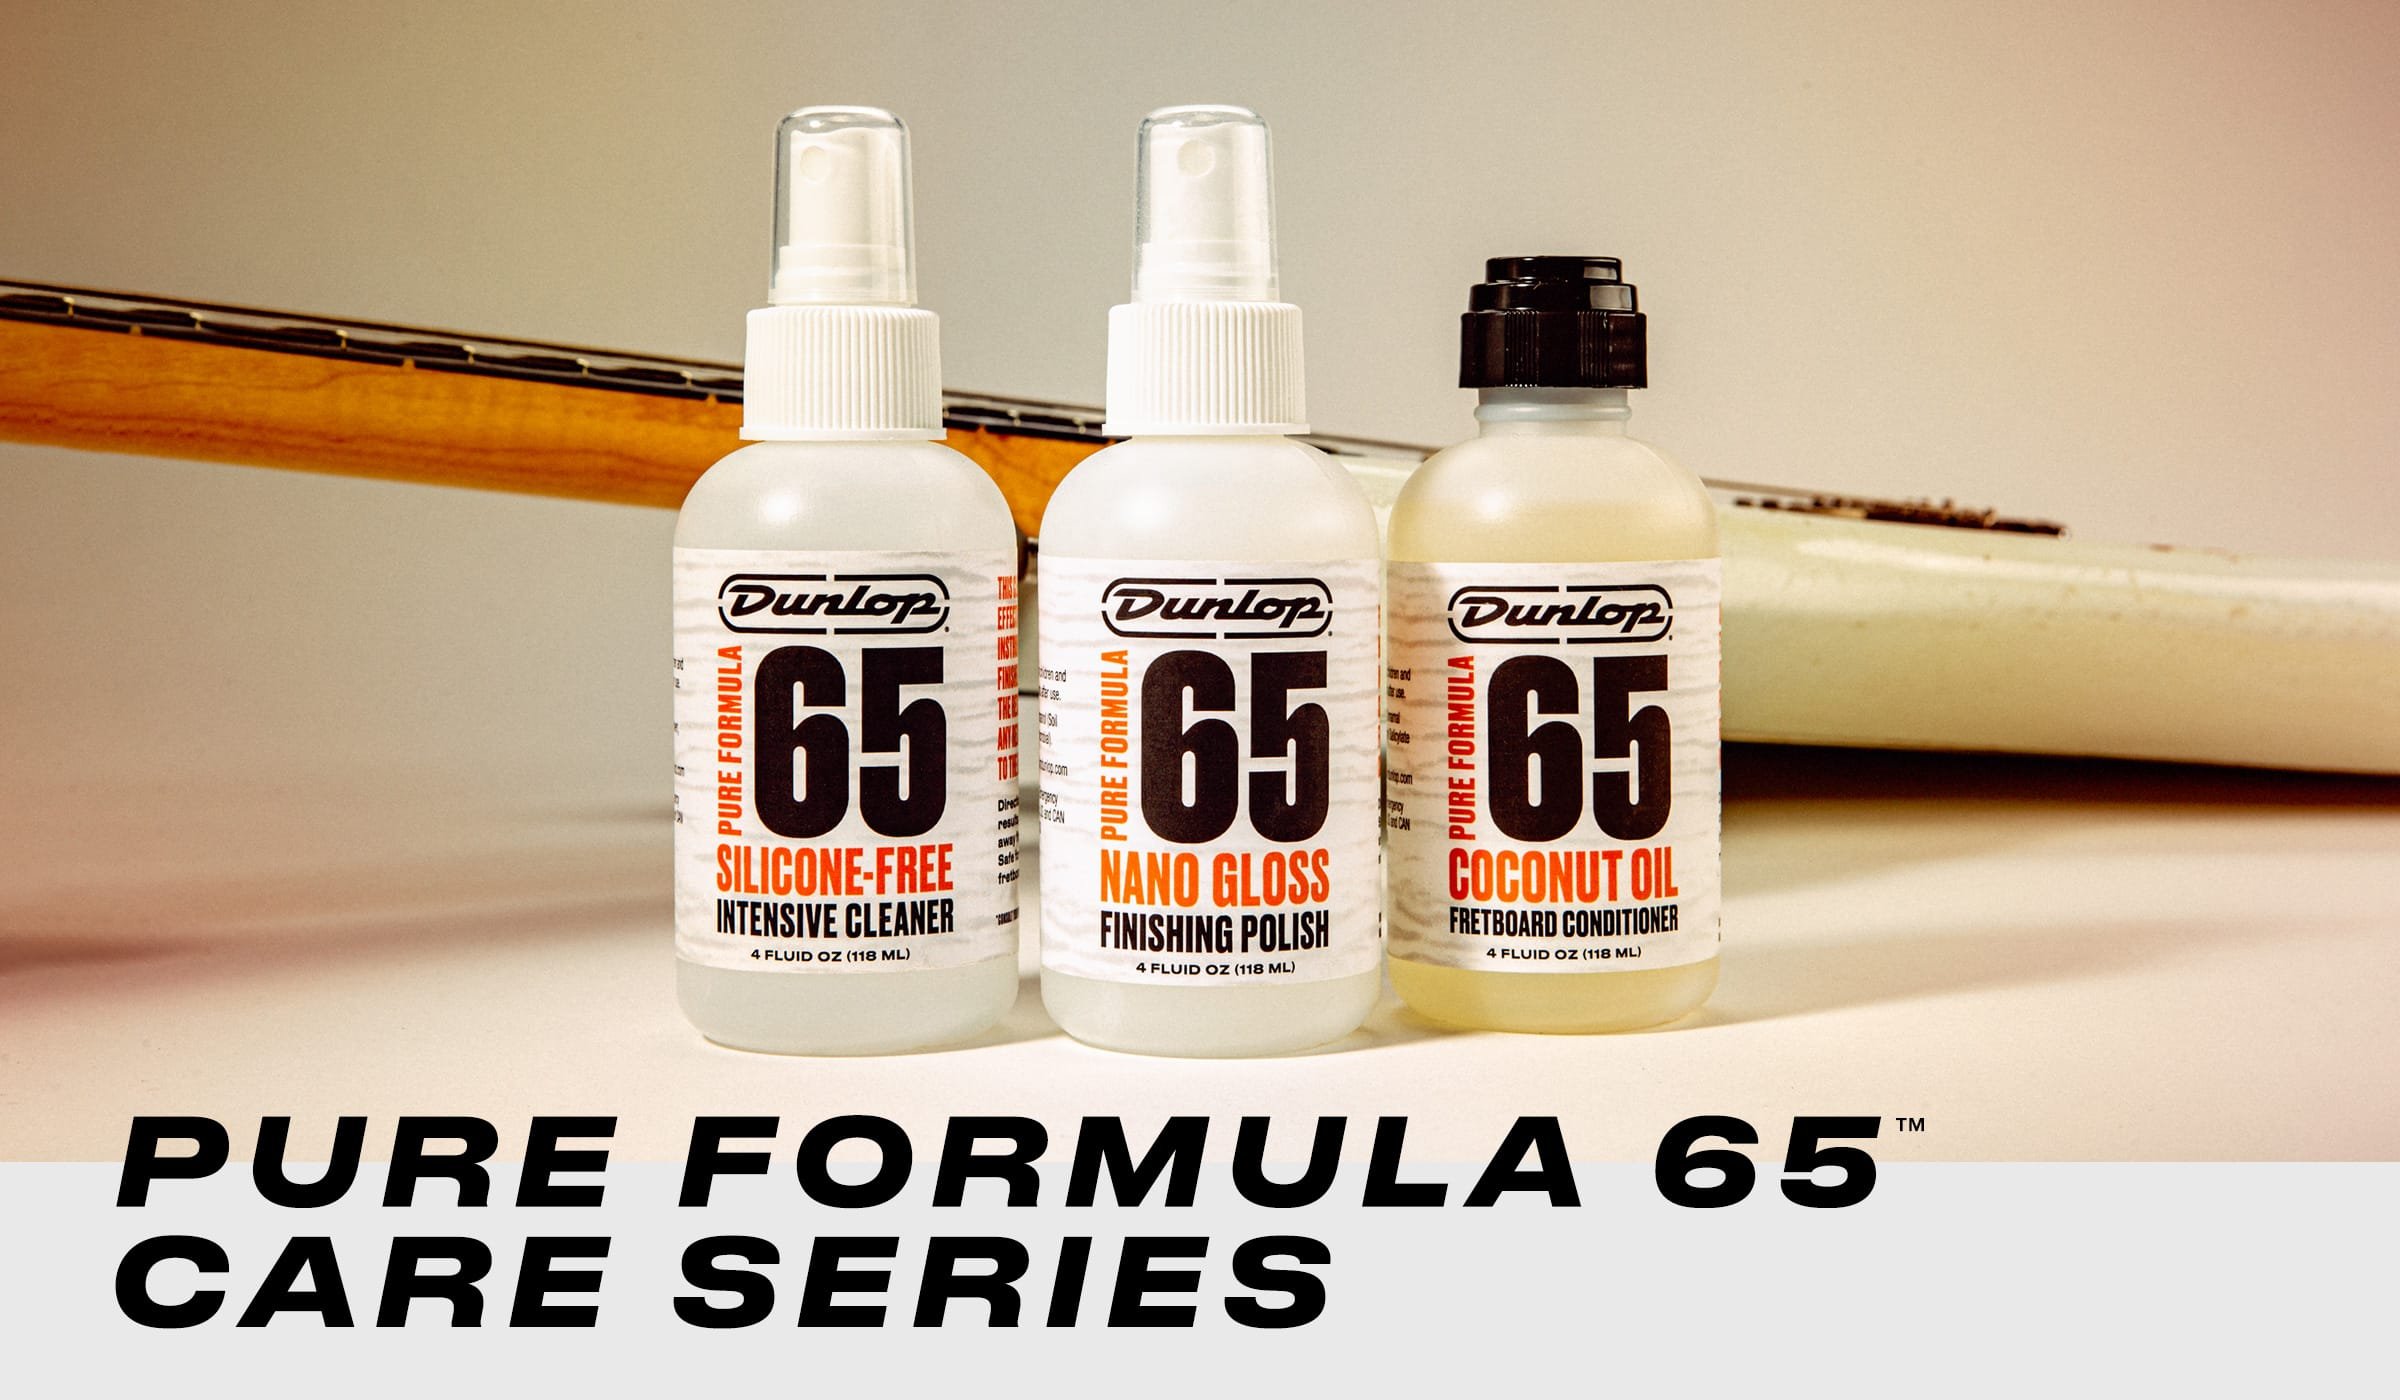 Take care of your guitar with the new Dunlop Pure Formula 65 Care